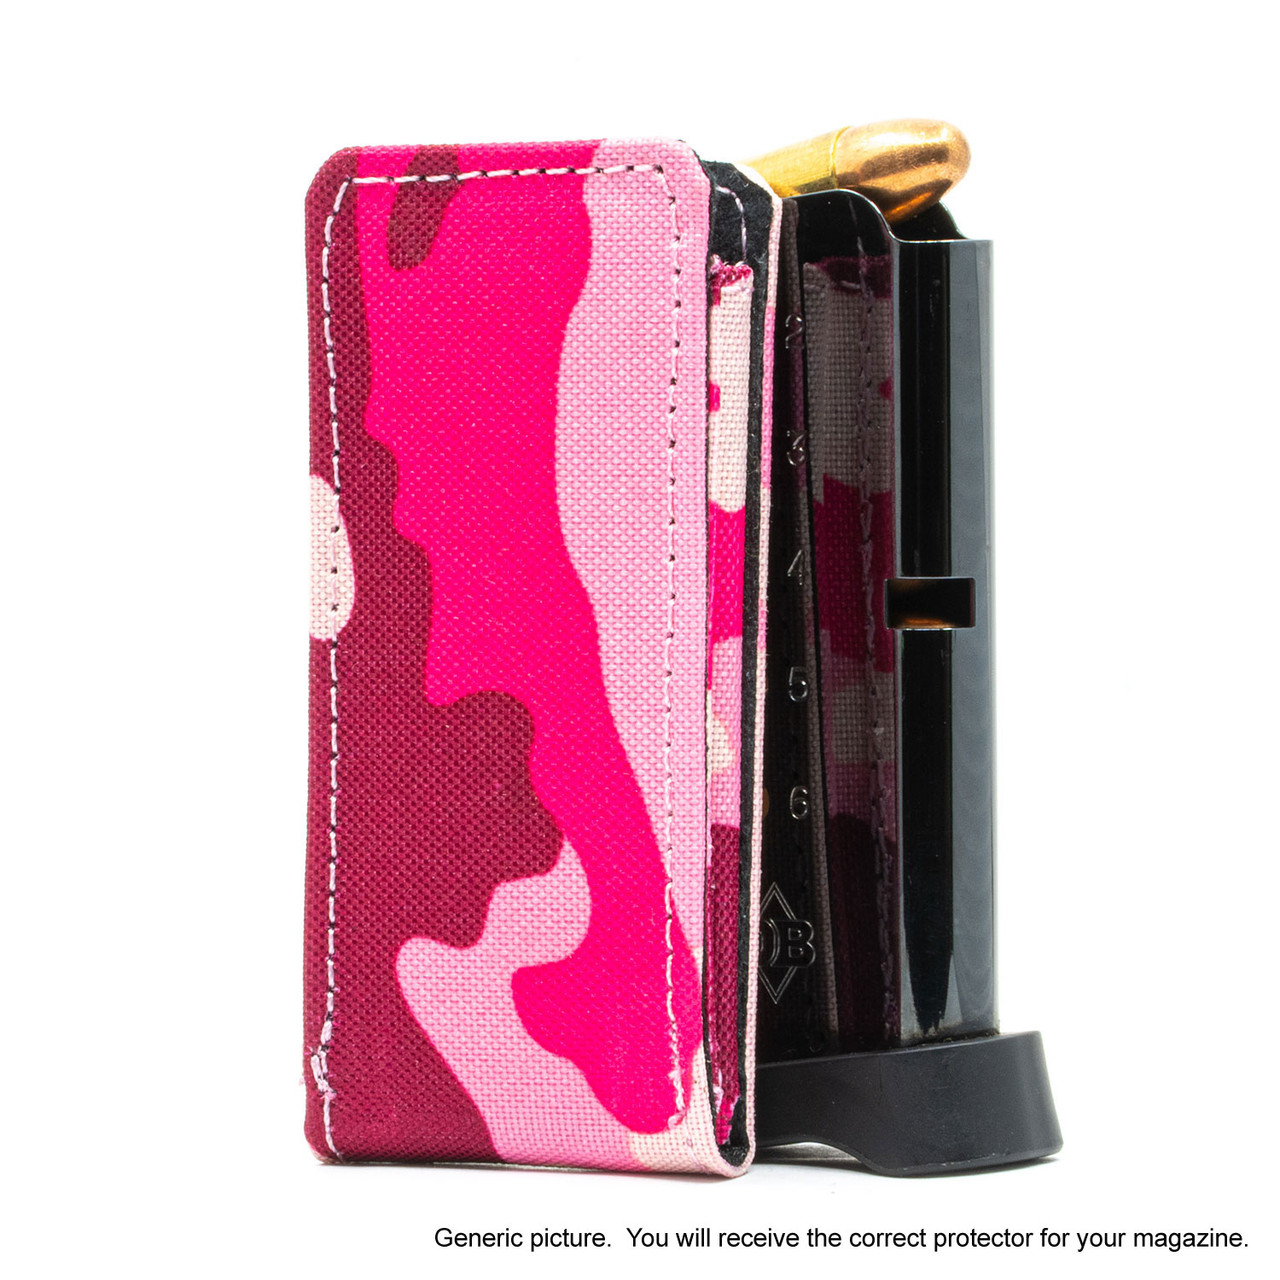 Walther PPS .40cal Pink Camouflage Magazine Pocket Protector